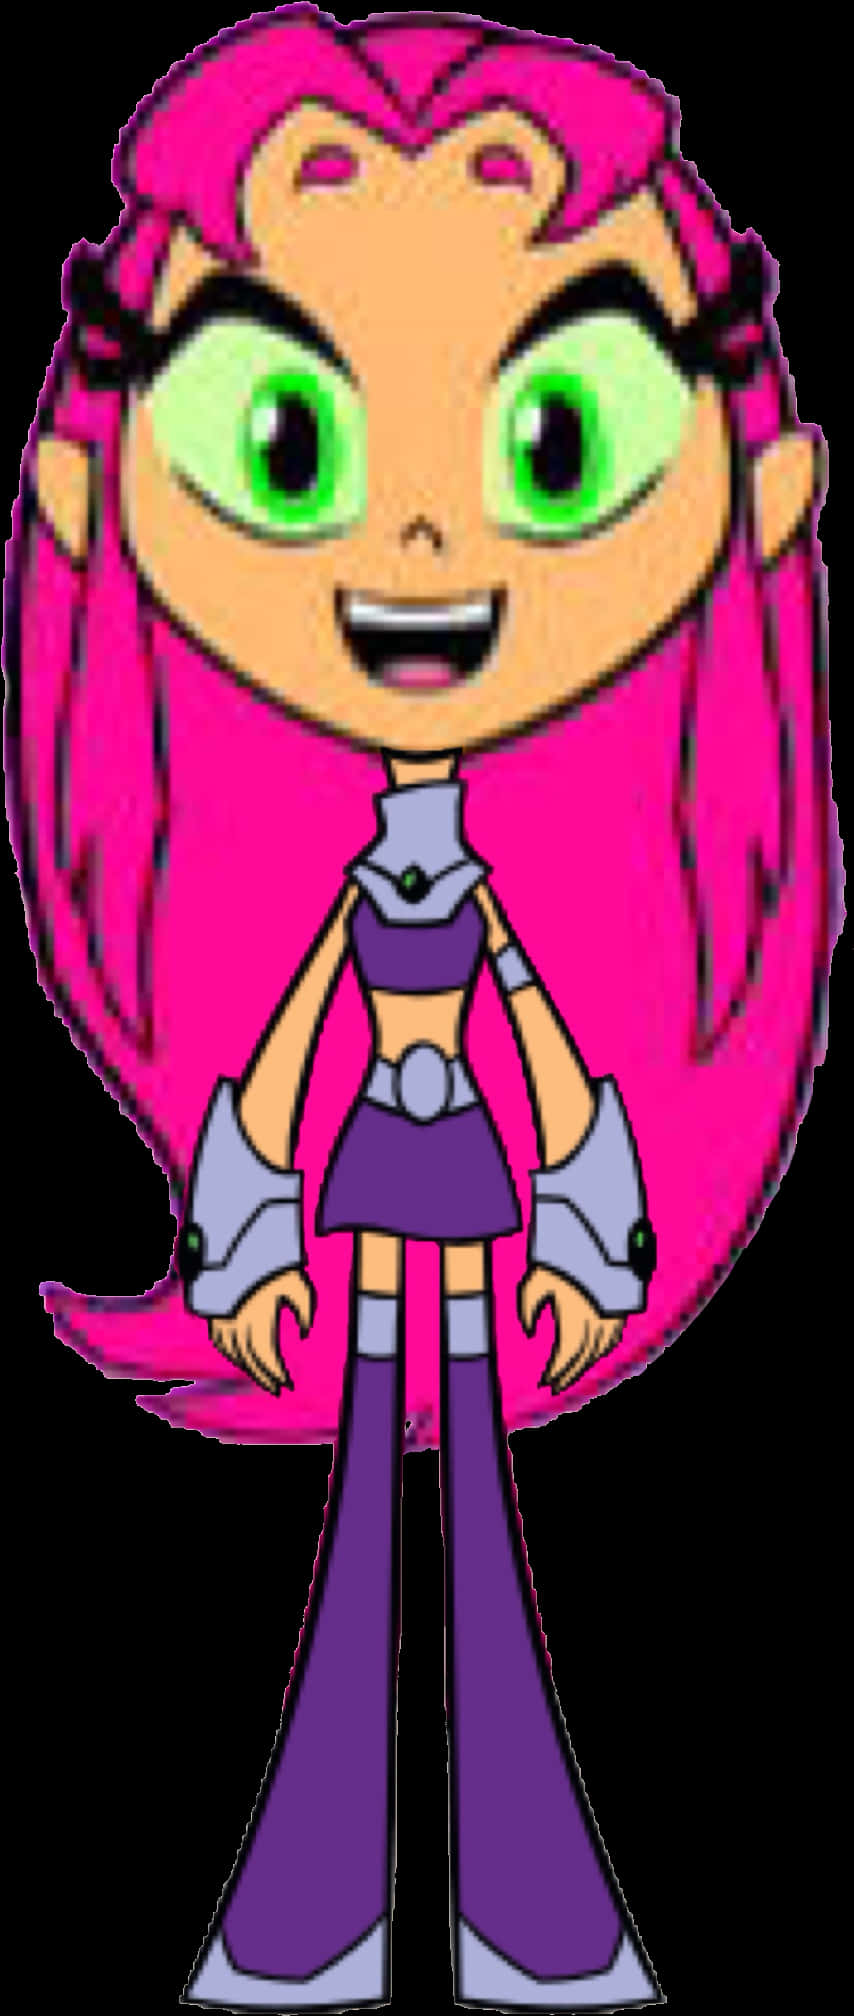 Cartoon Of A Woman With Pink Hair